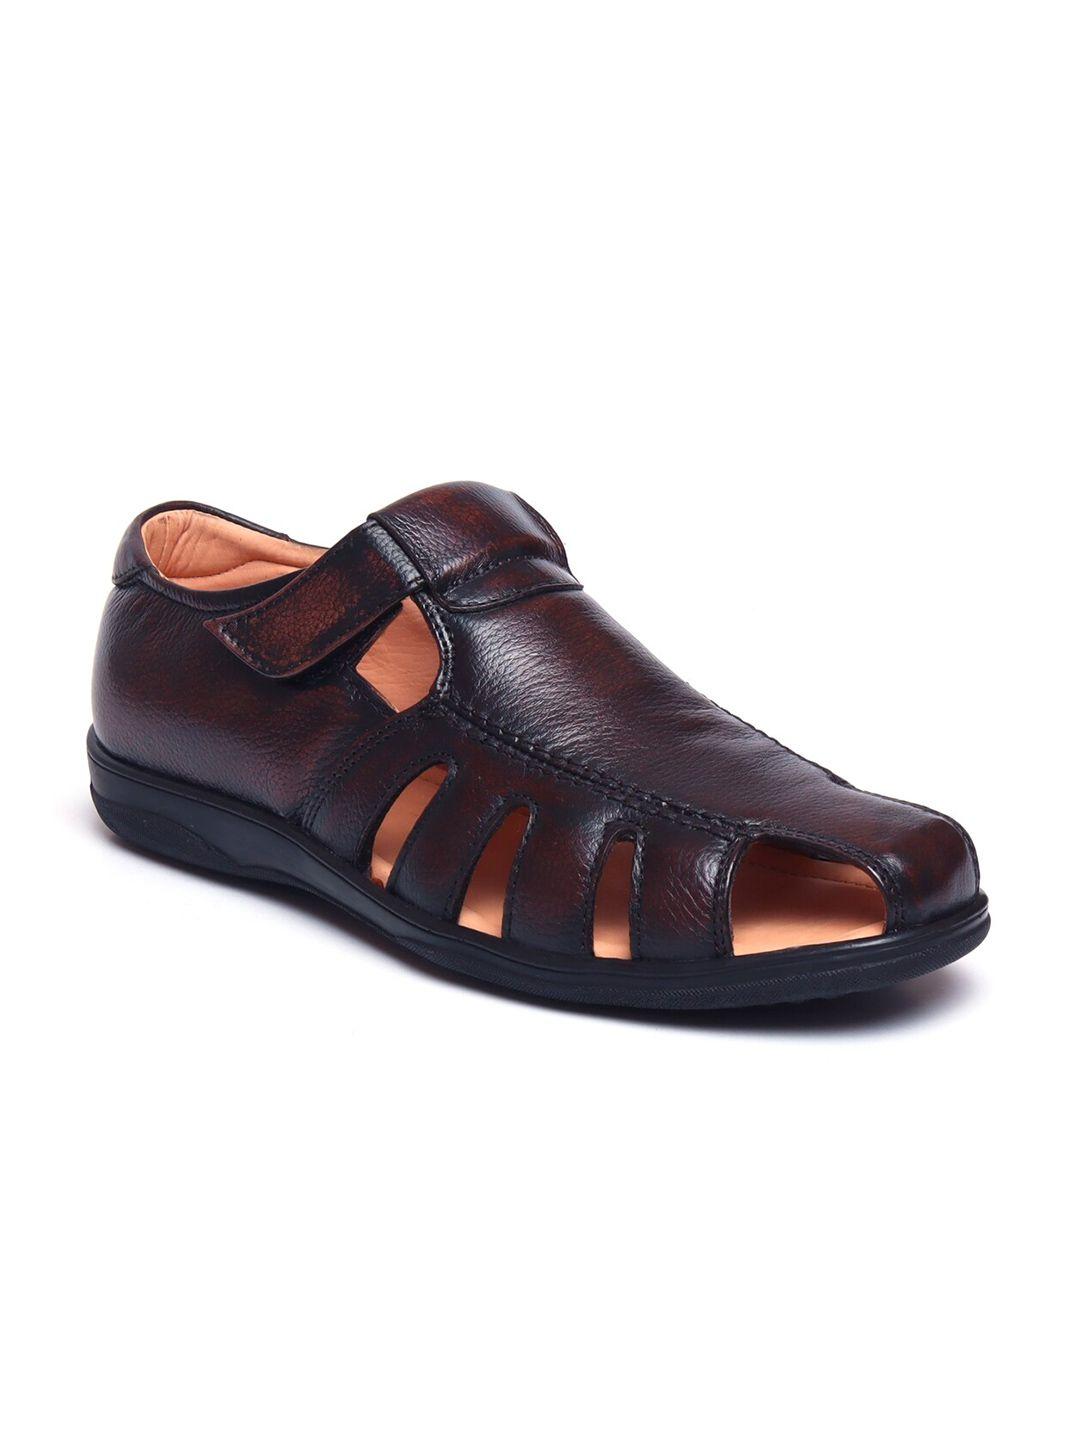 zoom shoes men brown leather fisherman sandals